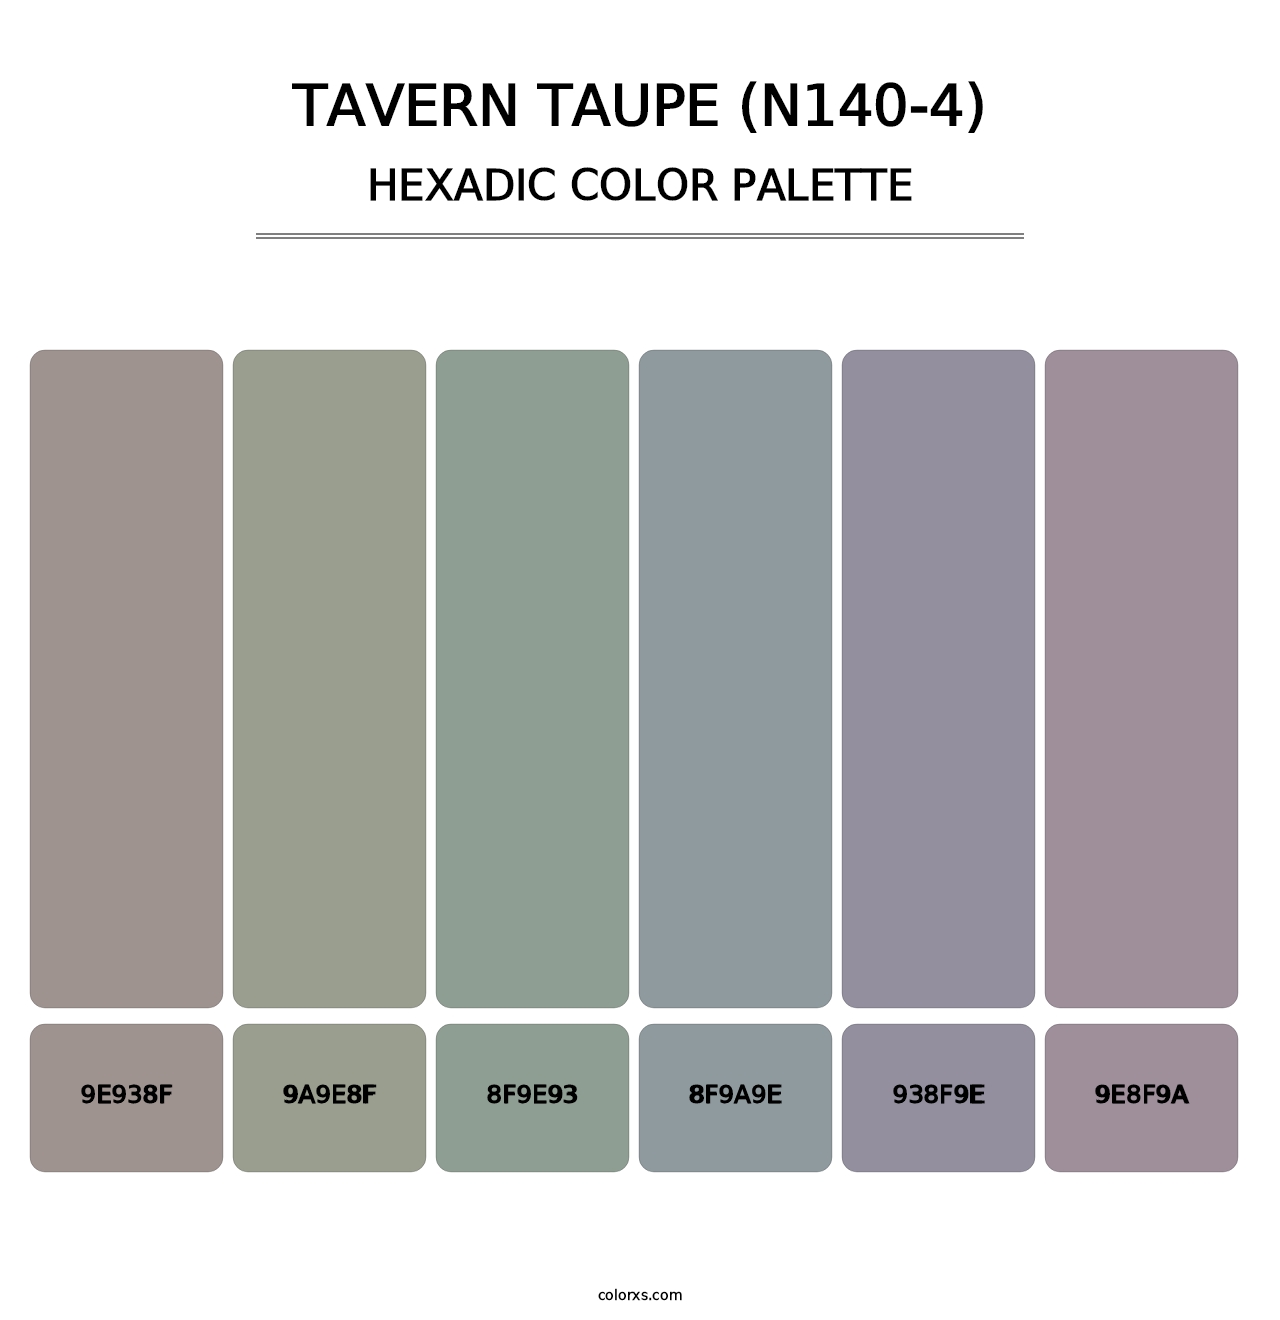 Tavern Taupe (N140-4) - Hexadic Color Palette